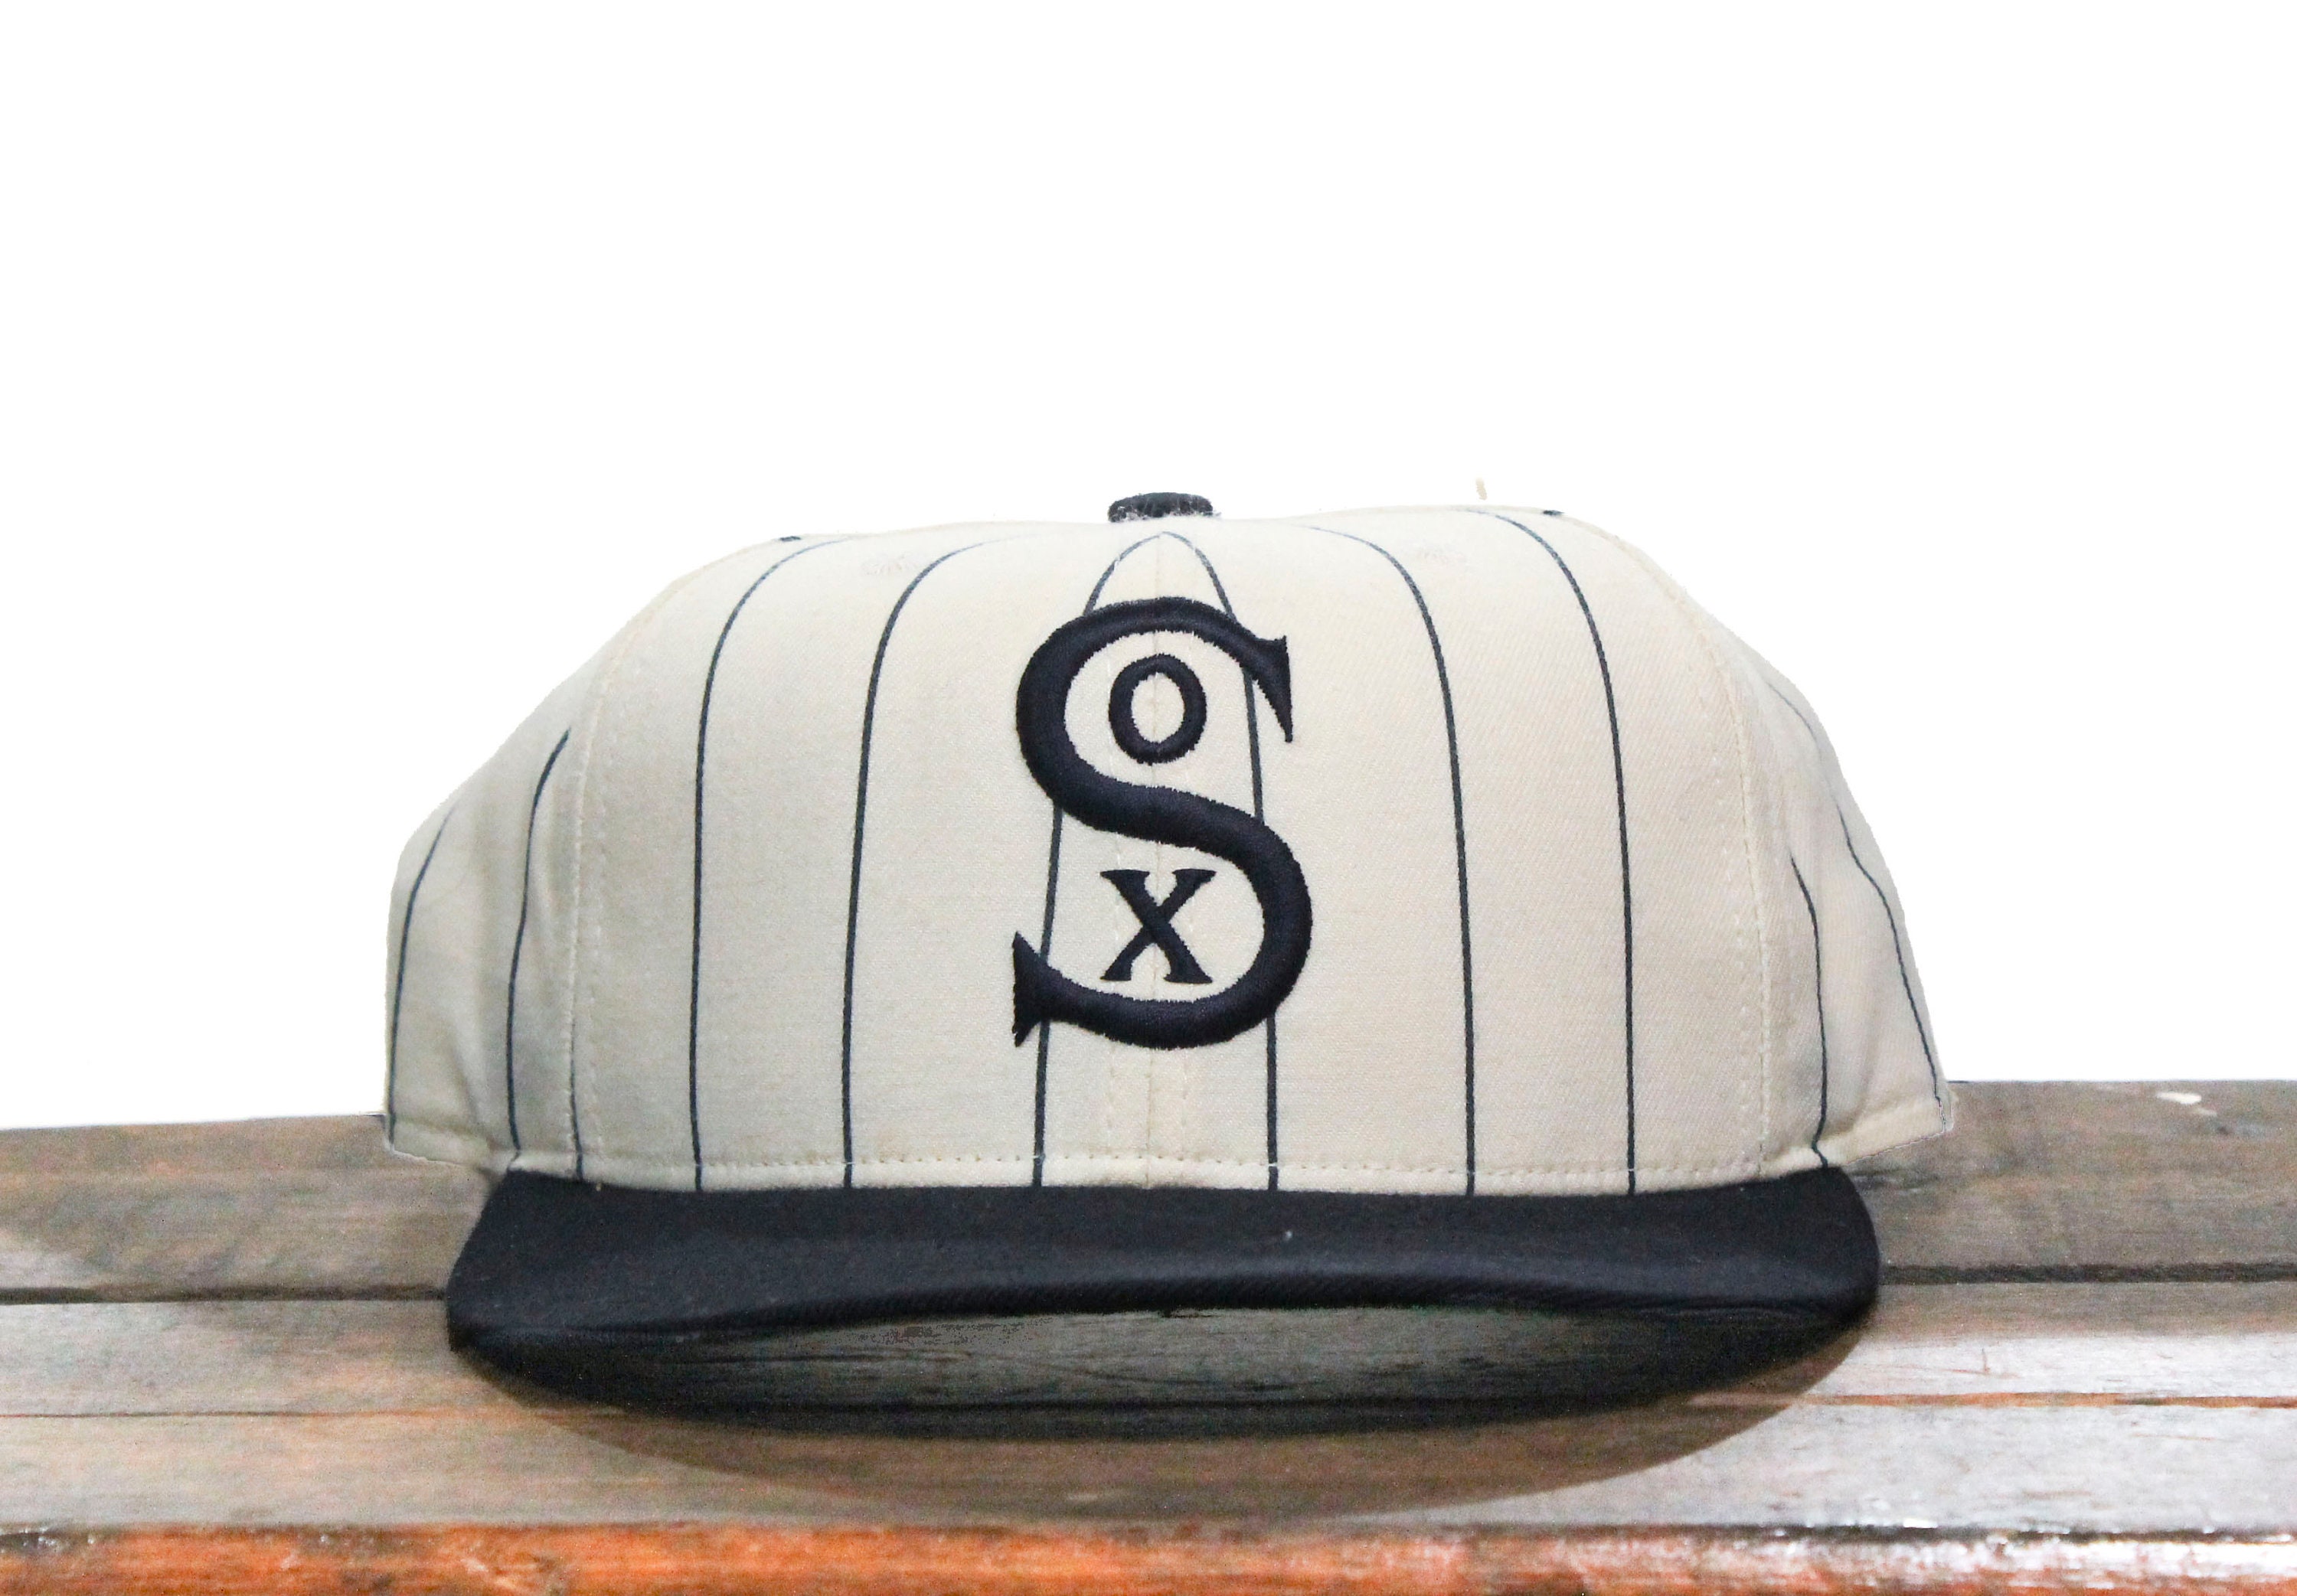 Vintage - Men - Cooperstown Collection White Sox Fitted Cap - White/Black